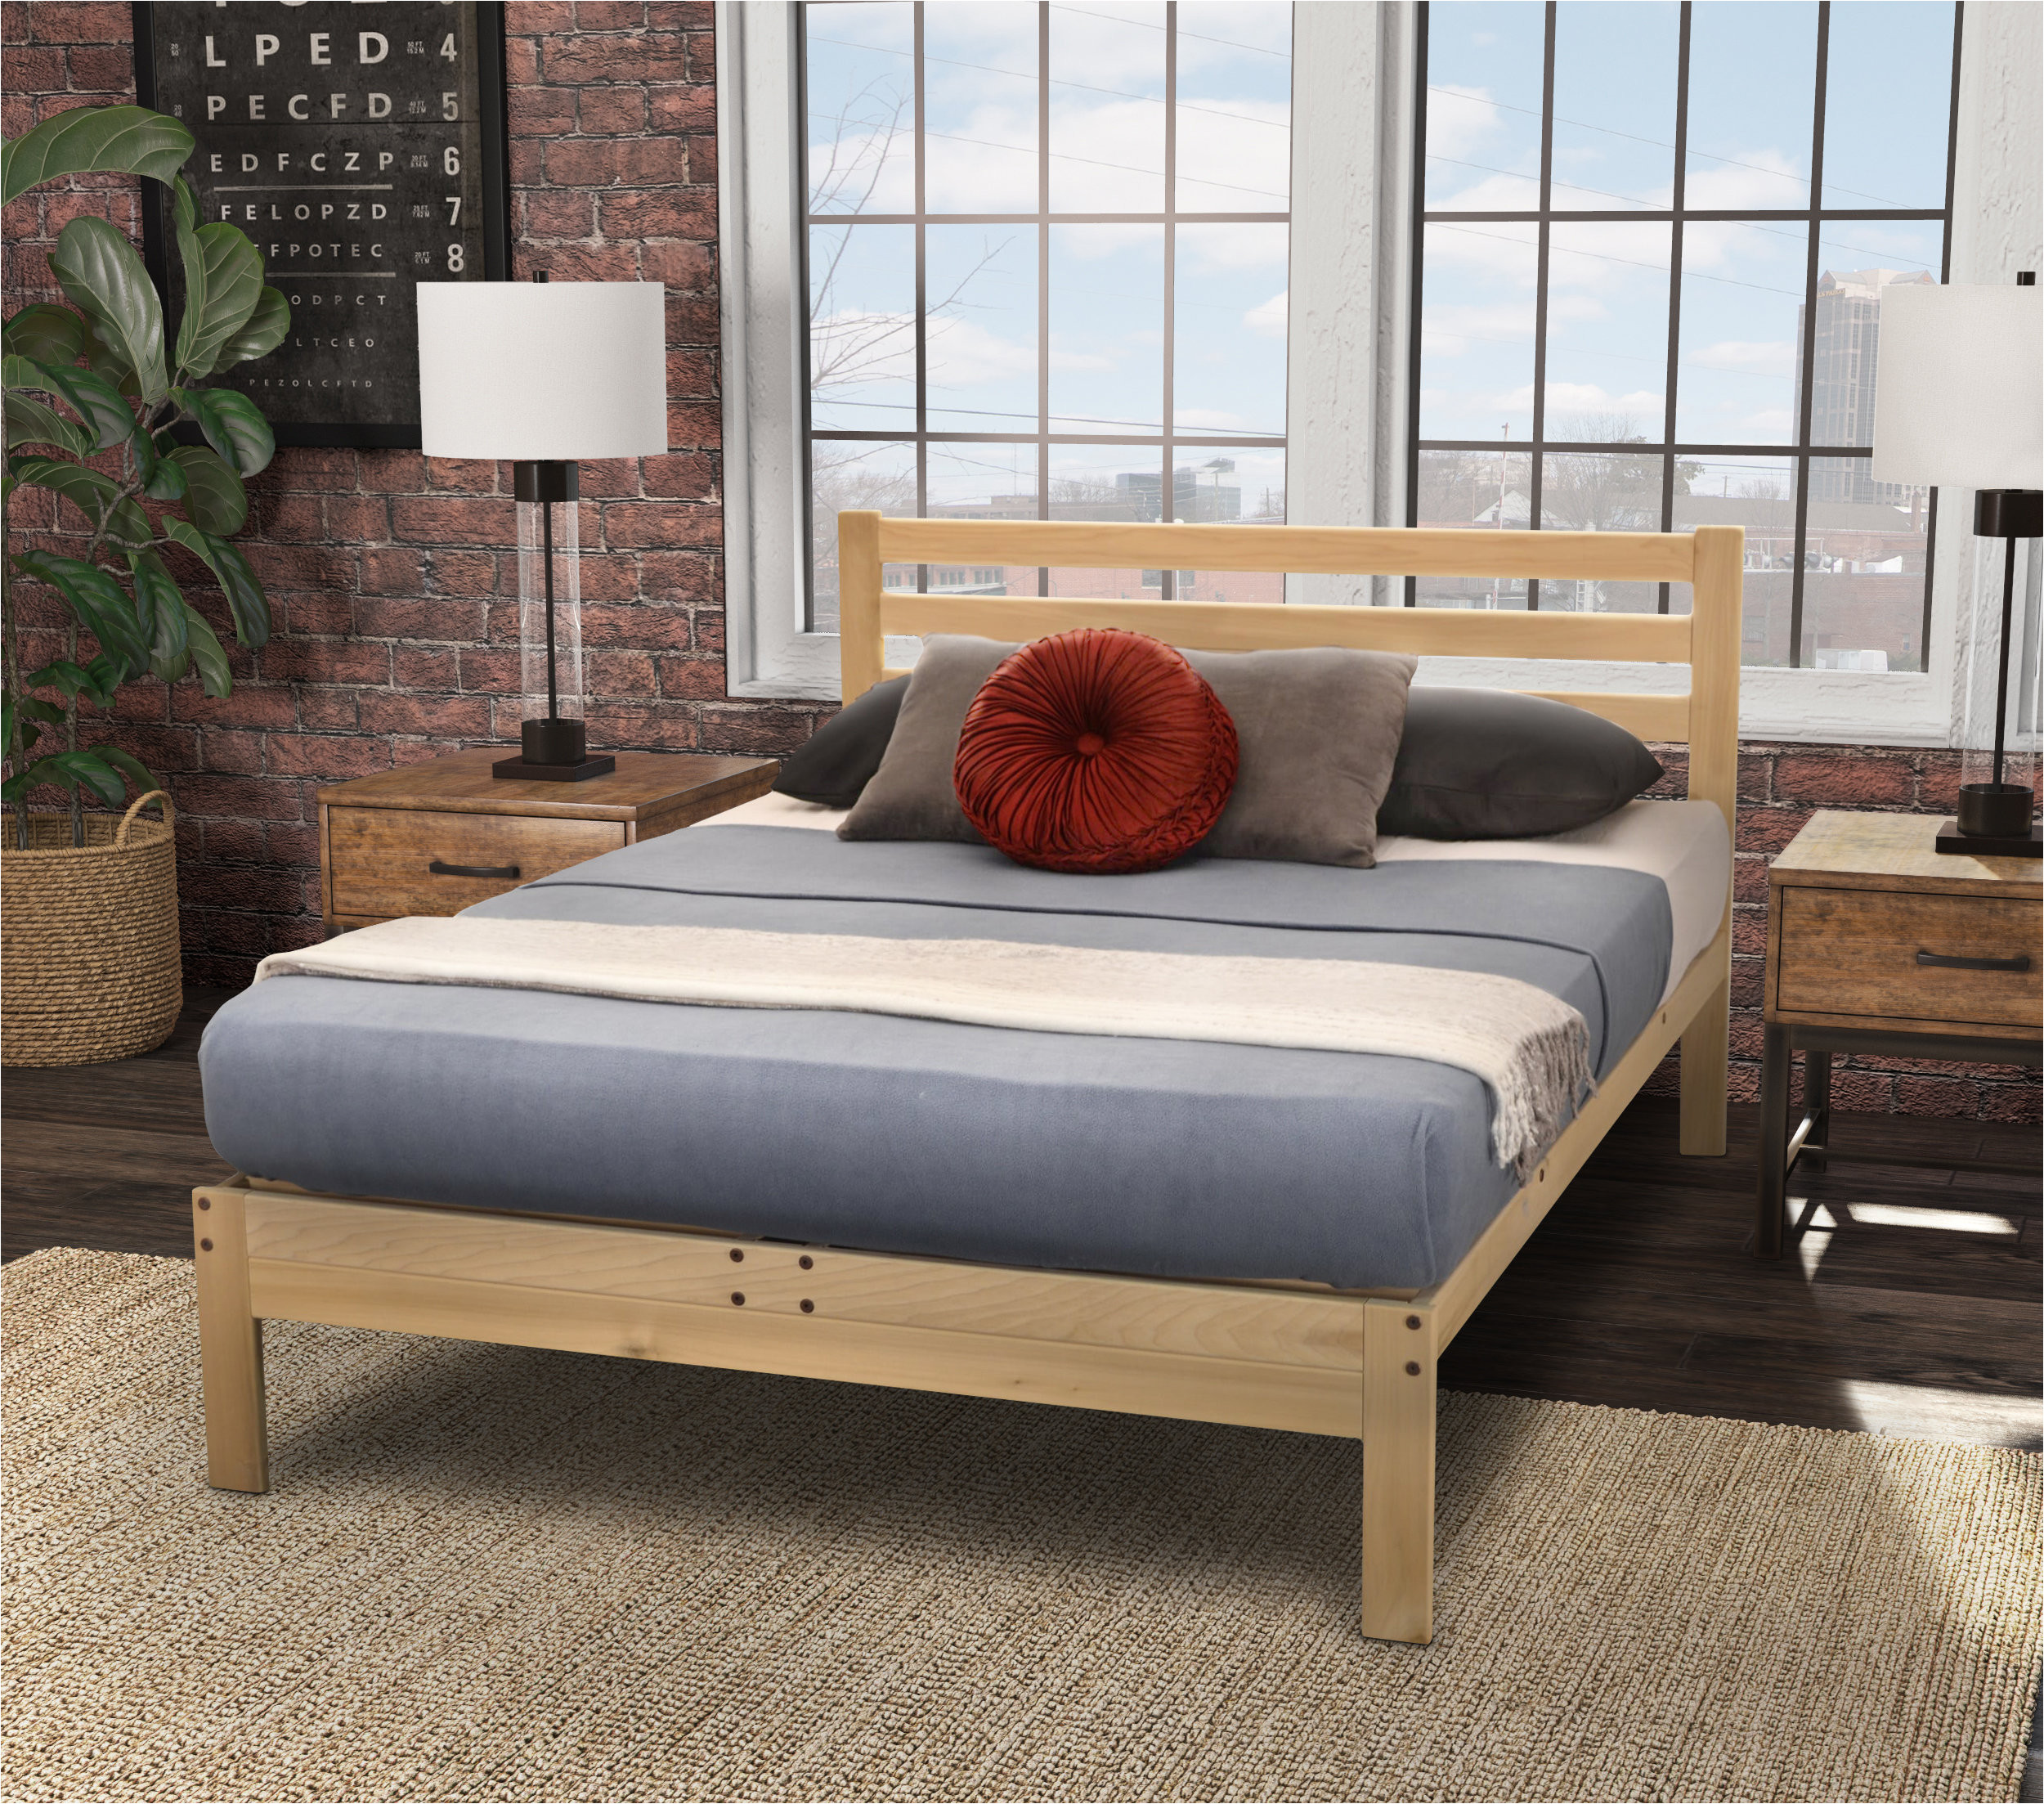 Extra Sturdy Queen Bed Frame | AdinaPorter